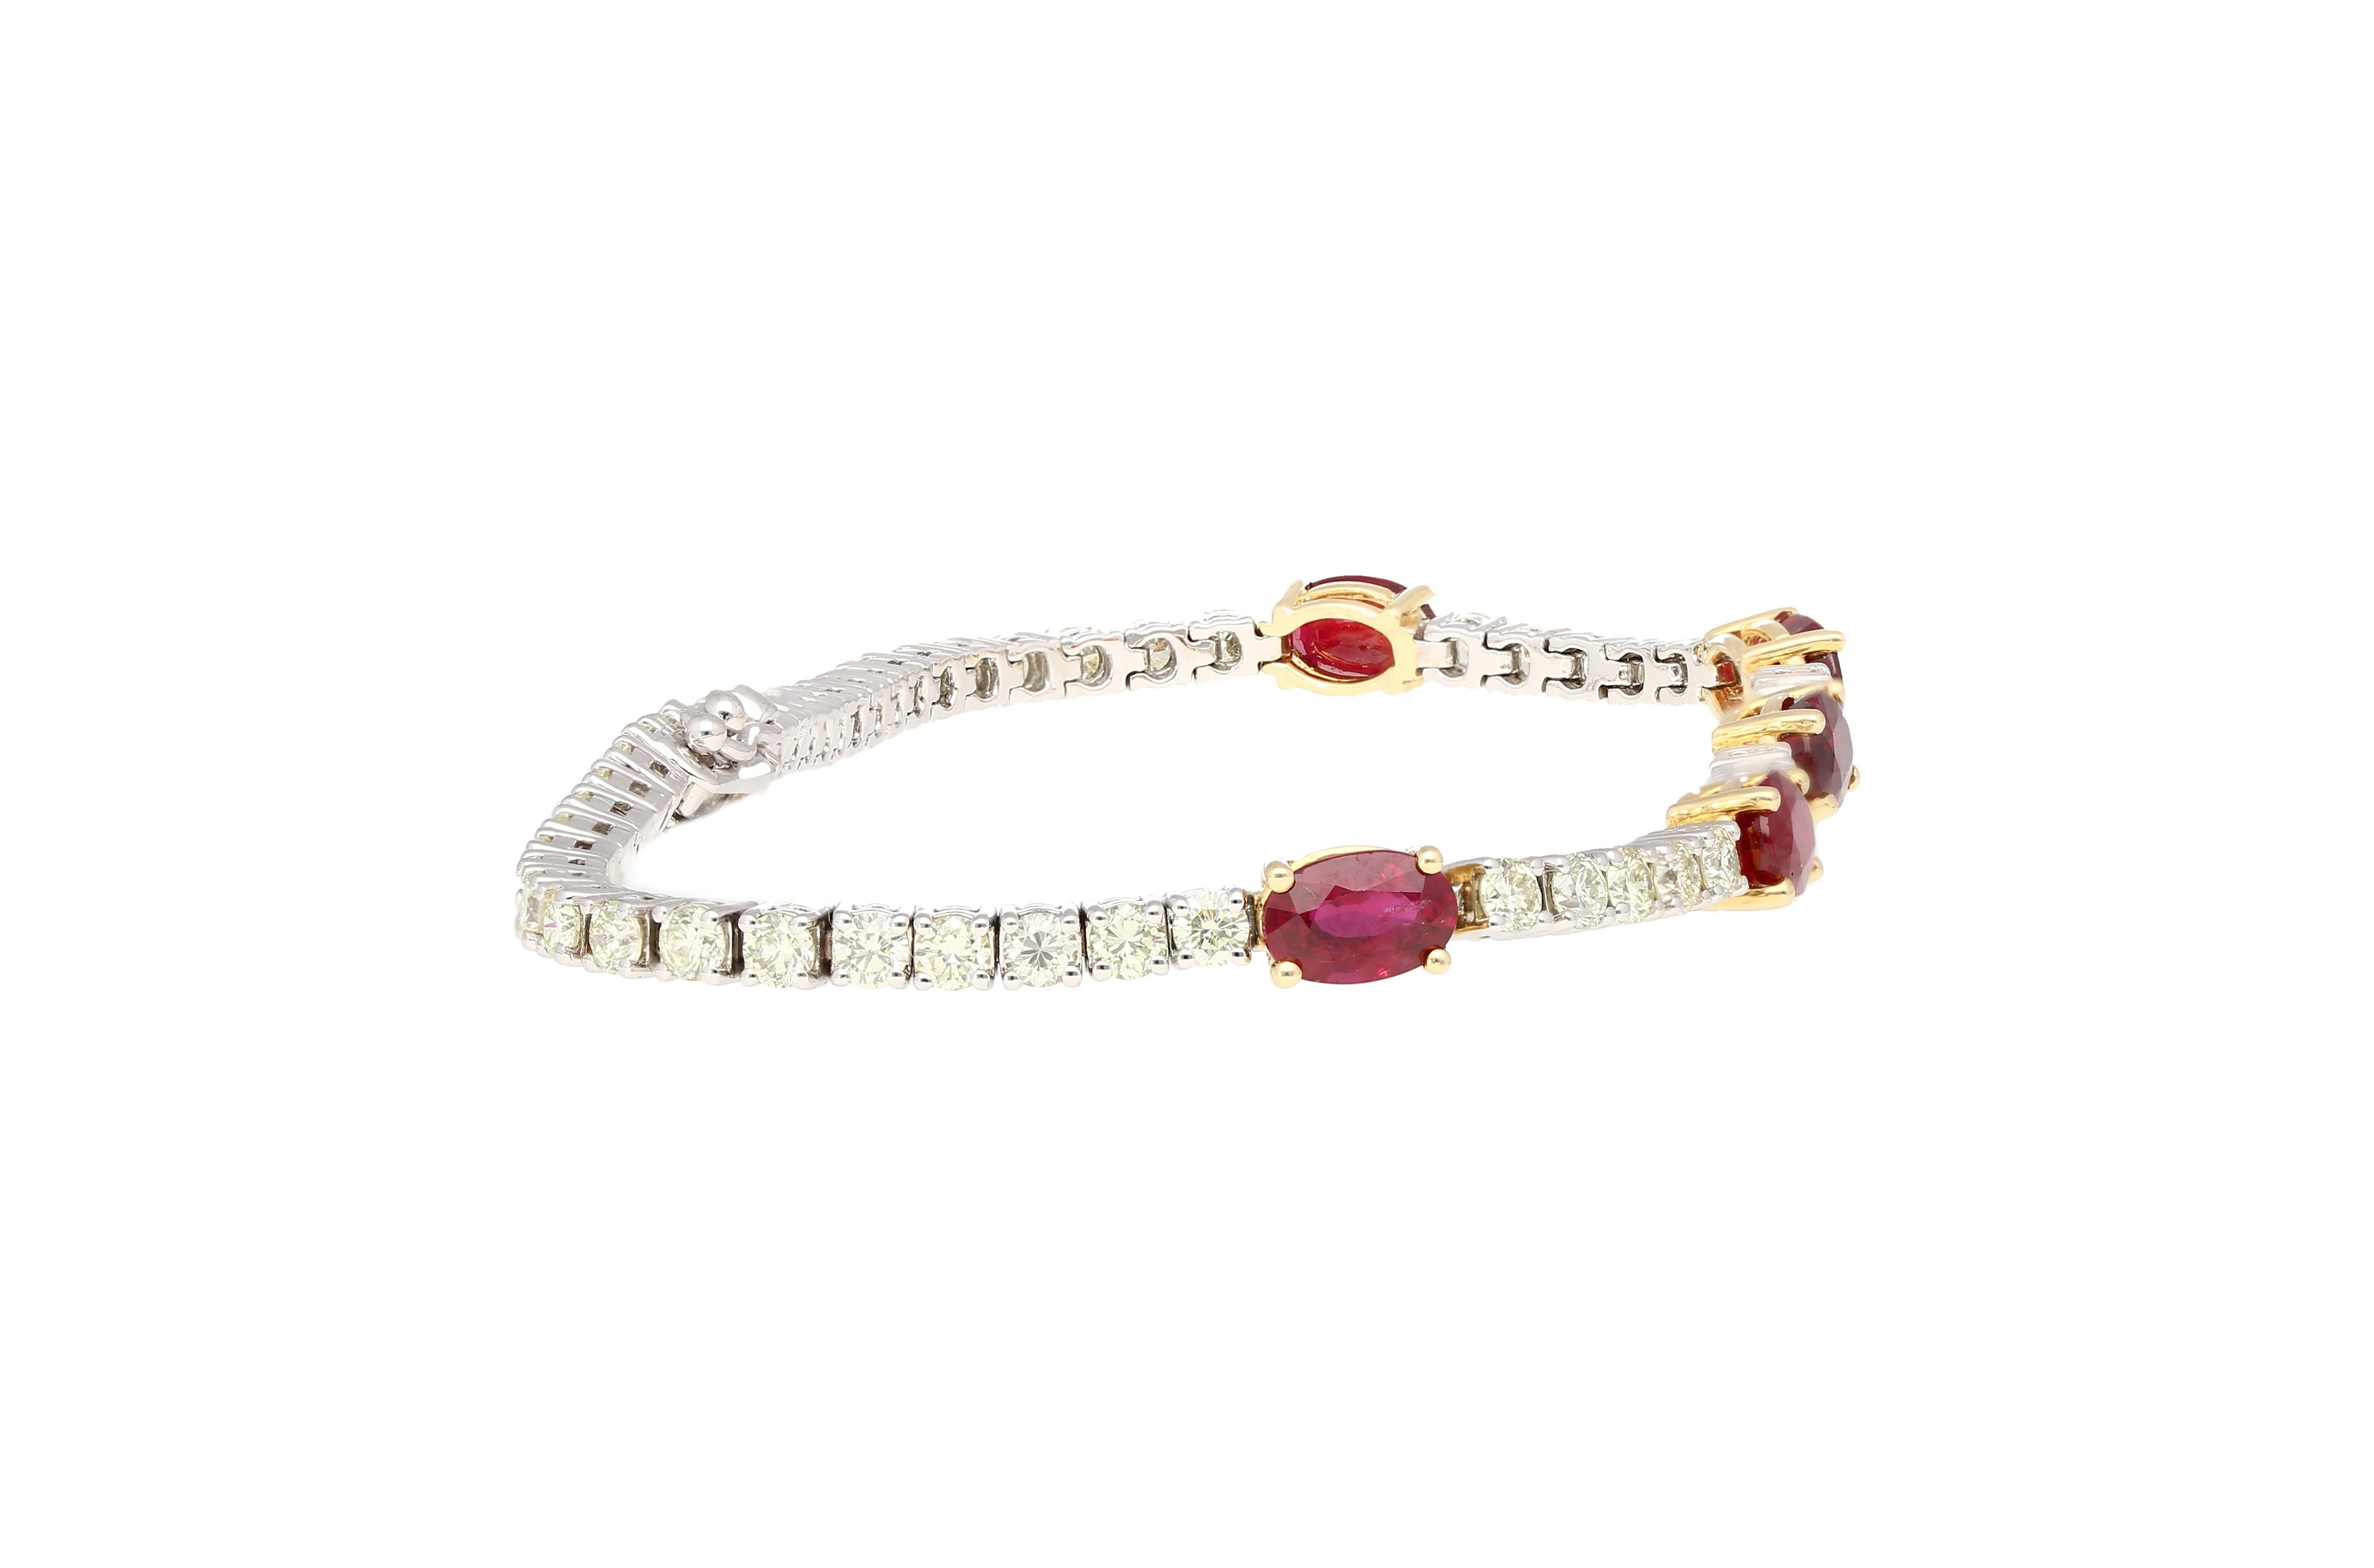 5.54 Carat Oval Cut Ruby and Diamond Tennis Bracelet in Two Tone 18K Gold For Sale 3